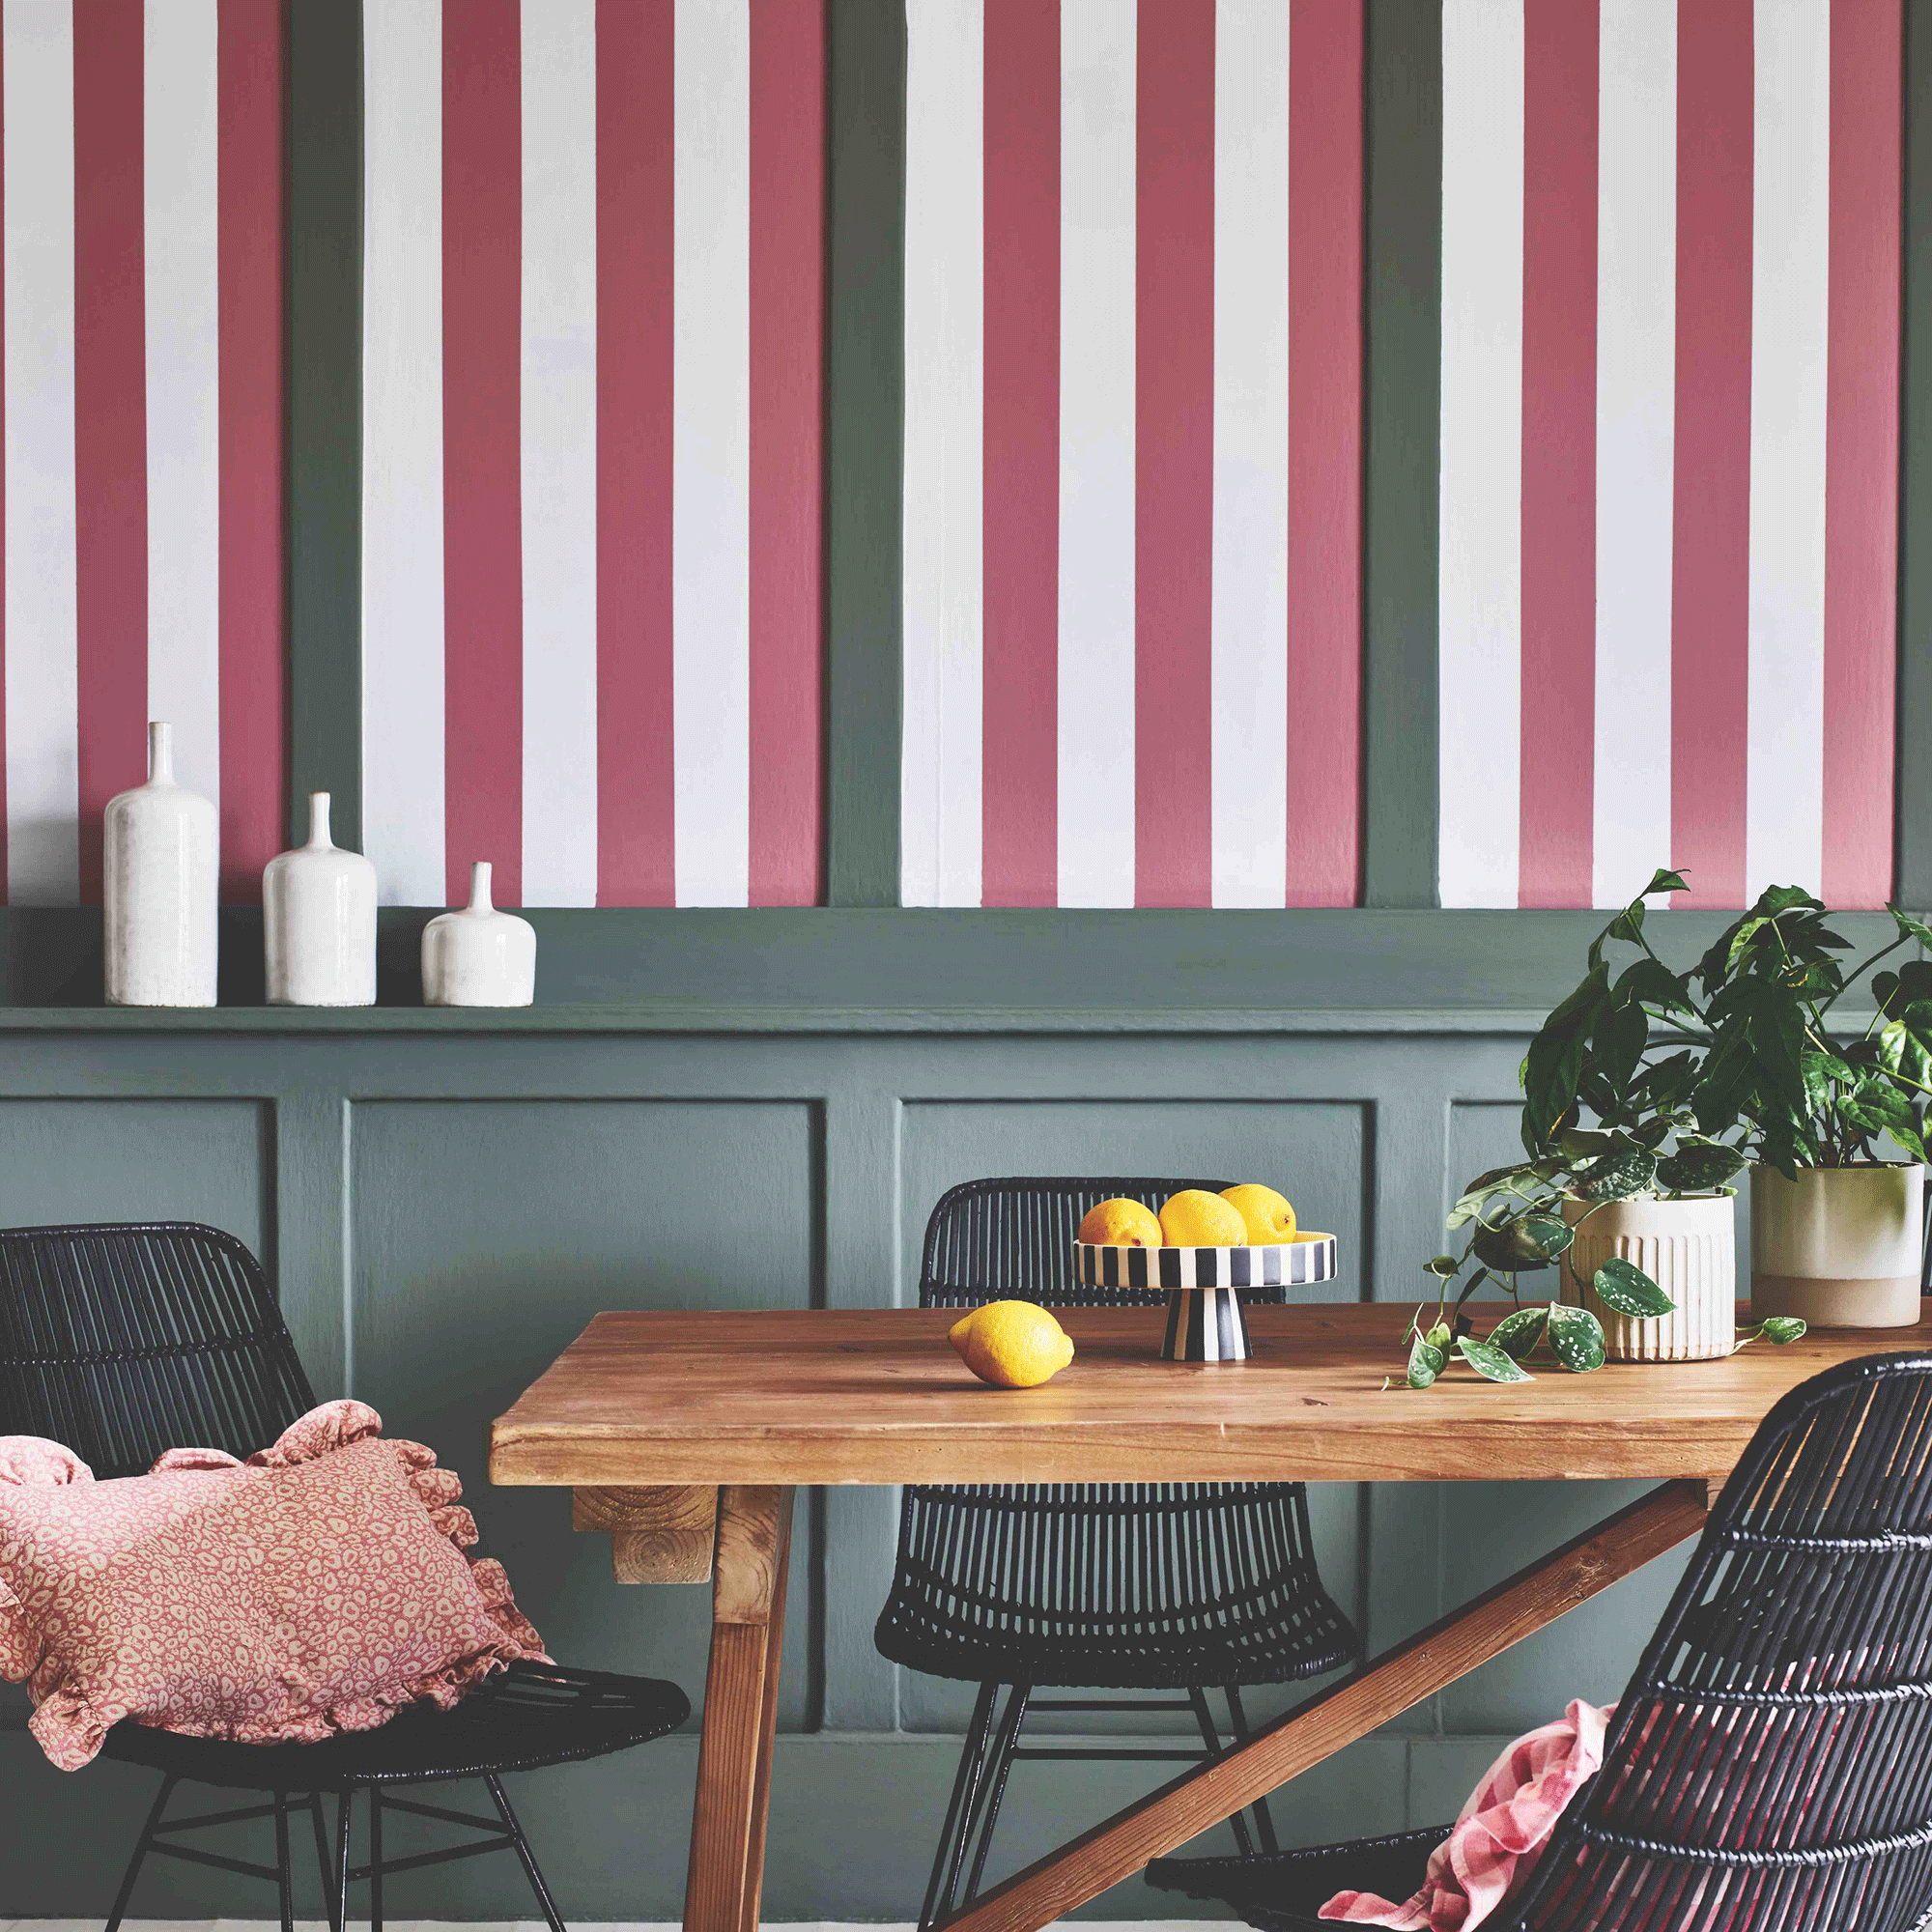 Pink and white striped walls with green panelling